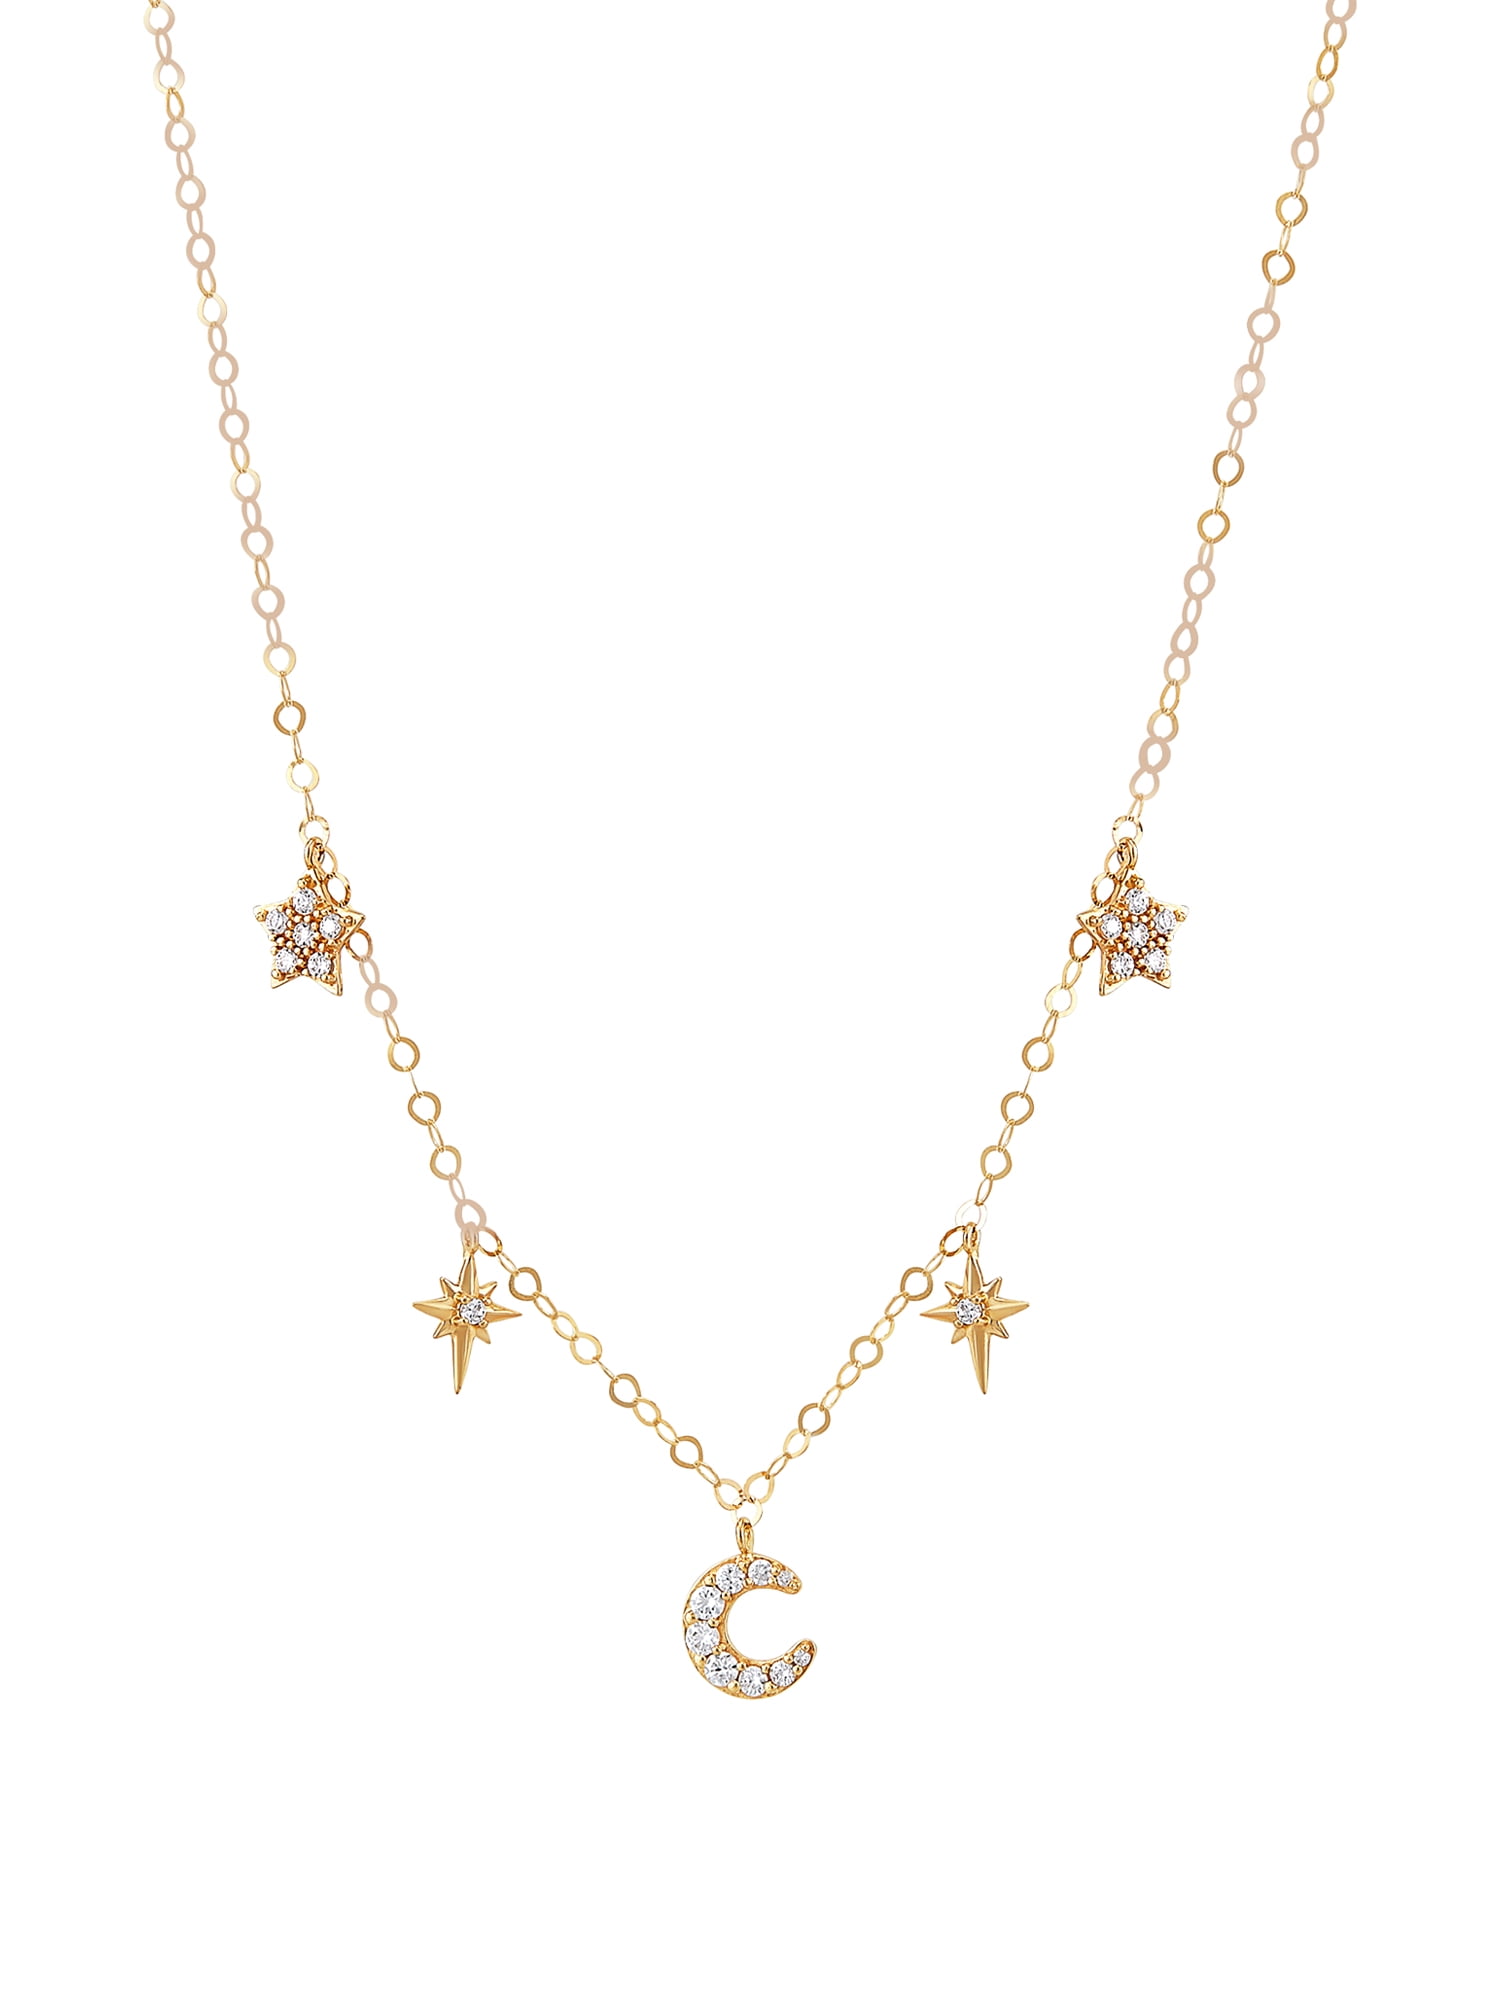 Brilliance Fine Jewelry 10K Yellow Gold Cubic Zirconia Moon Stars Cable Chain Necklace, 18"